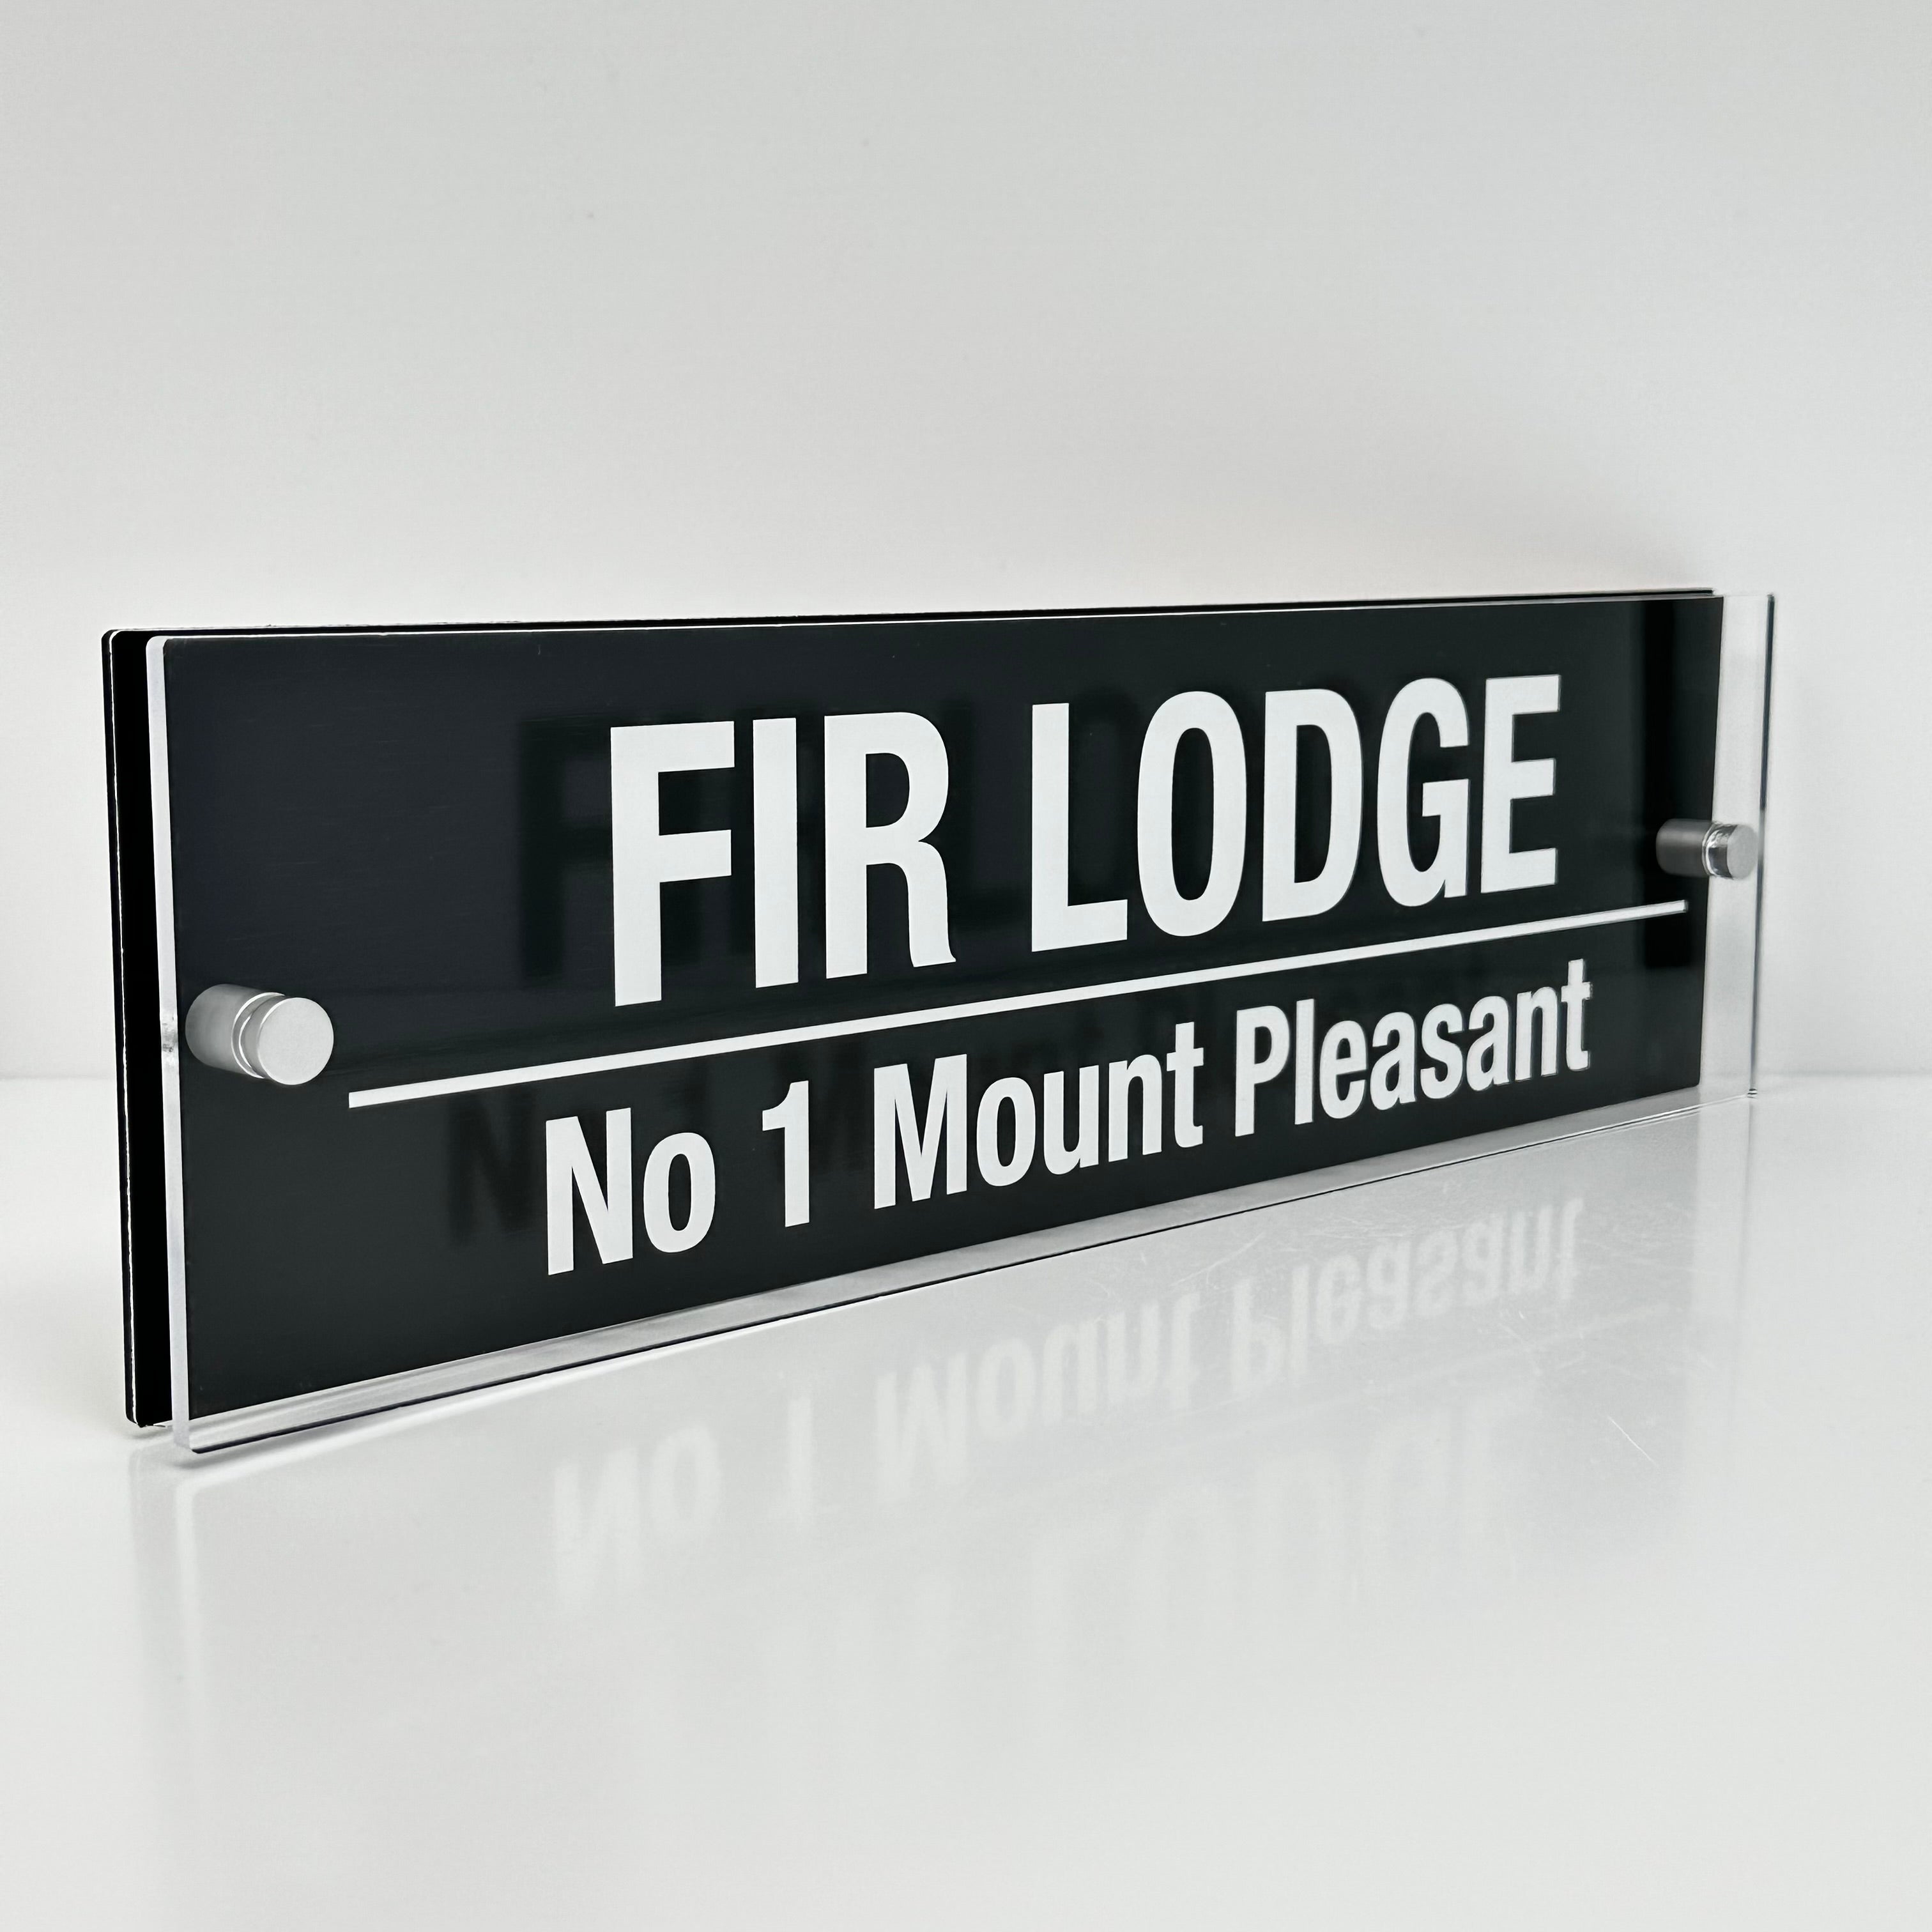 The Fir Lodge Modern House Sign with Perspex Acrylic Front, Black Rear Panel and Satin Silver Stand Off Fixings ( Size - 42cm x 12cm )